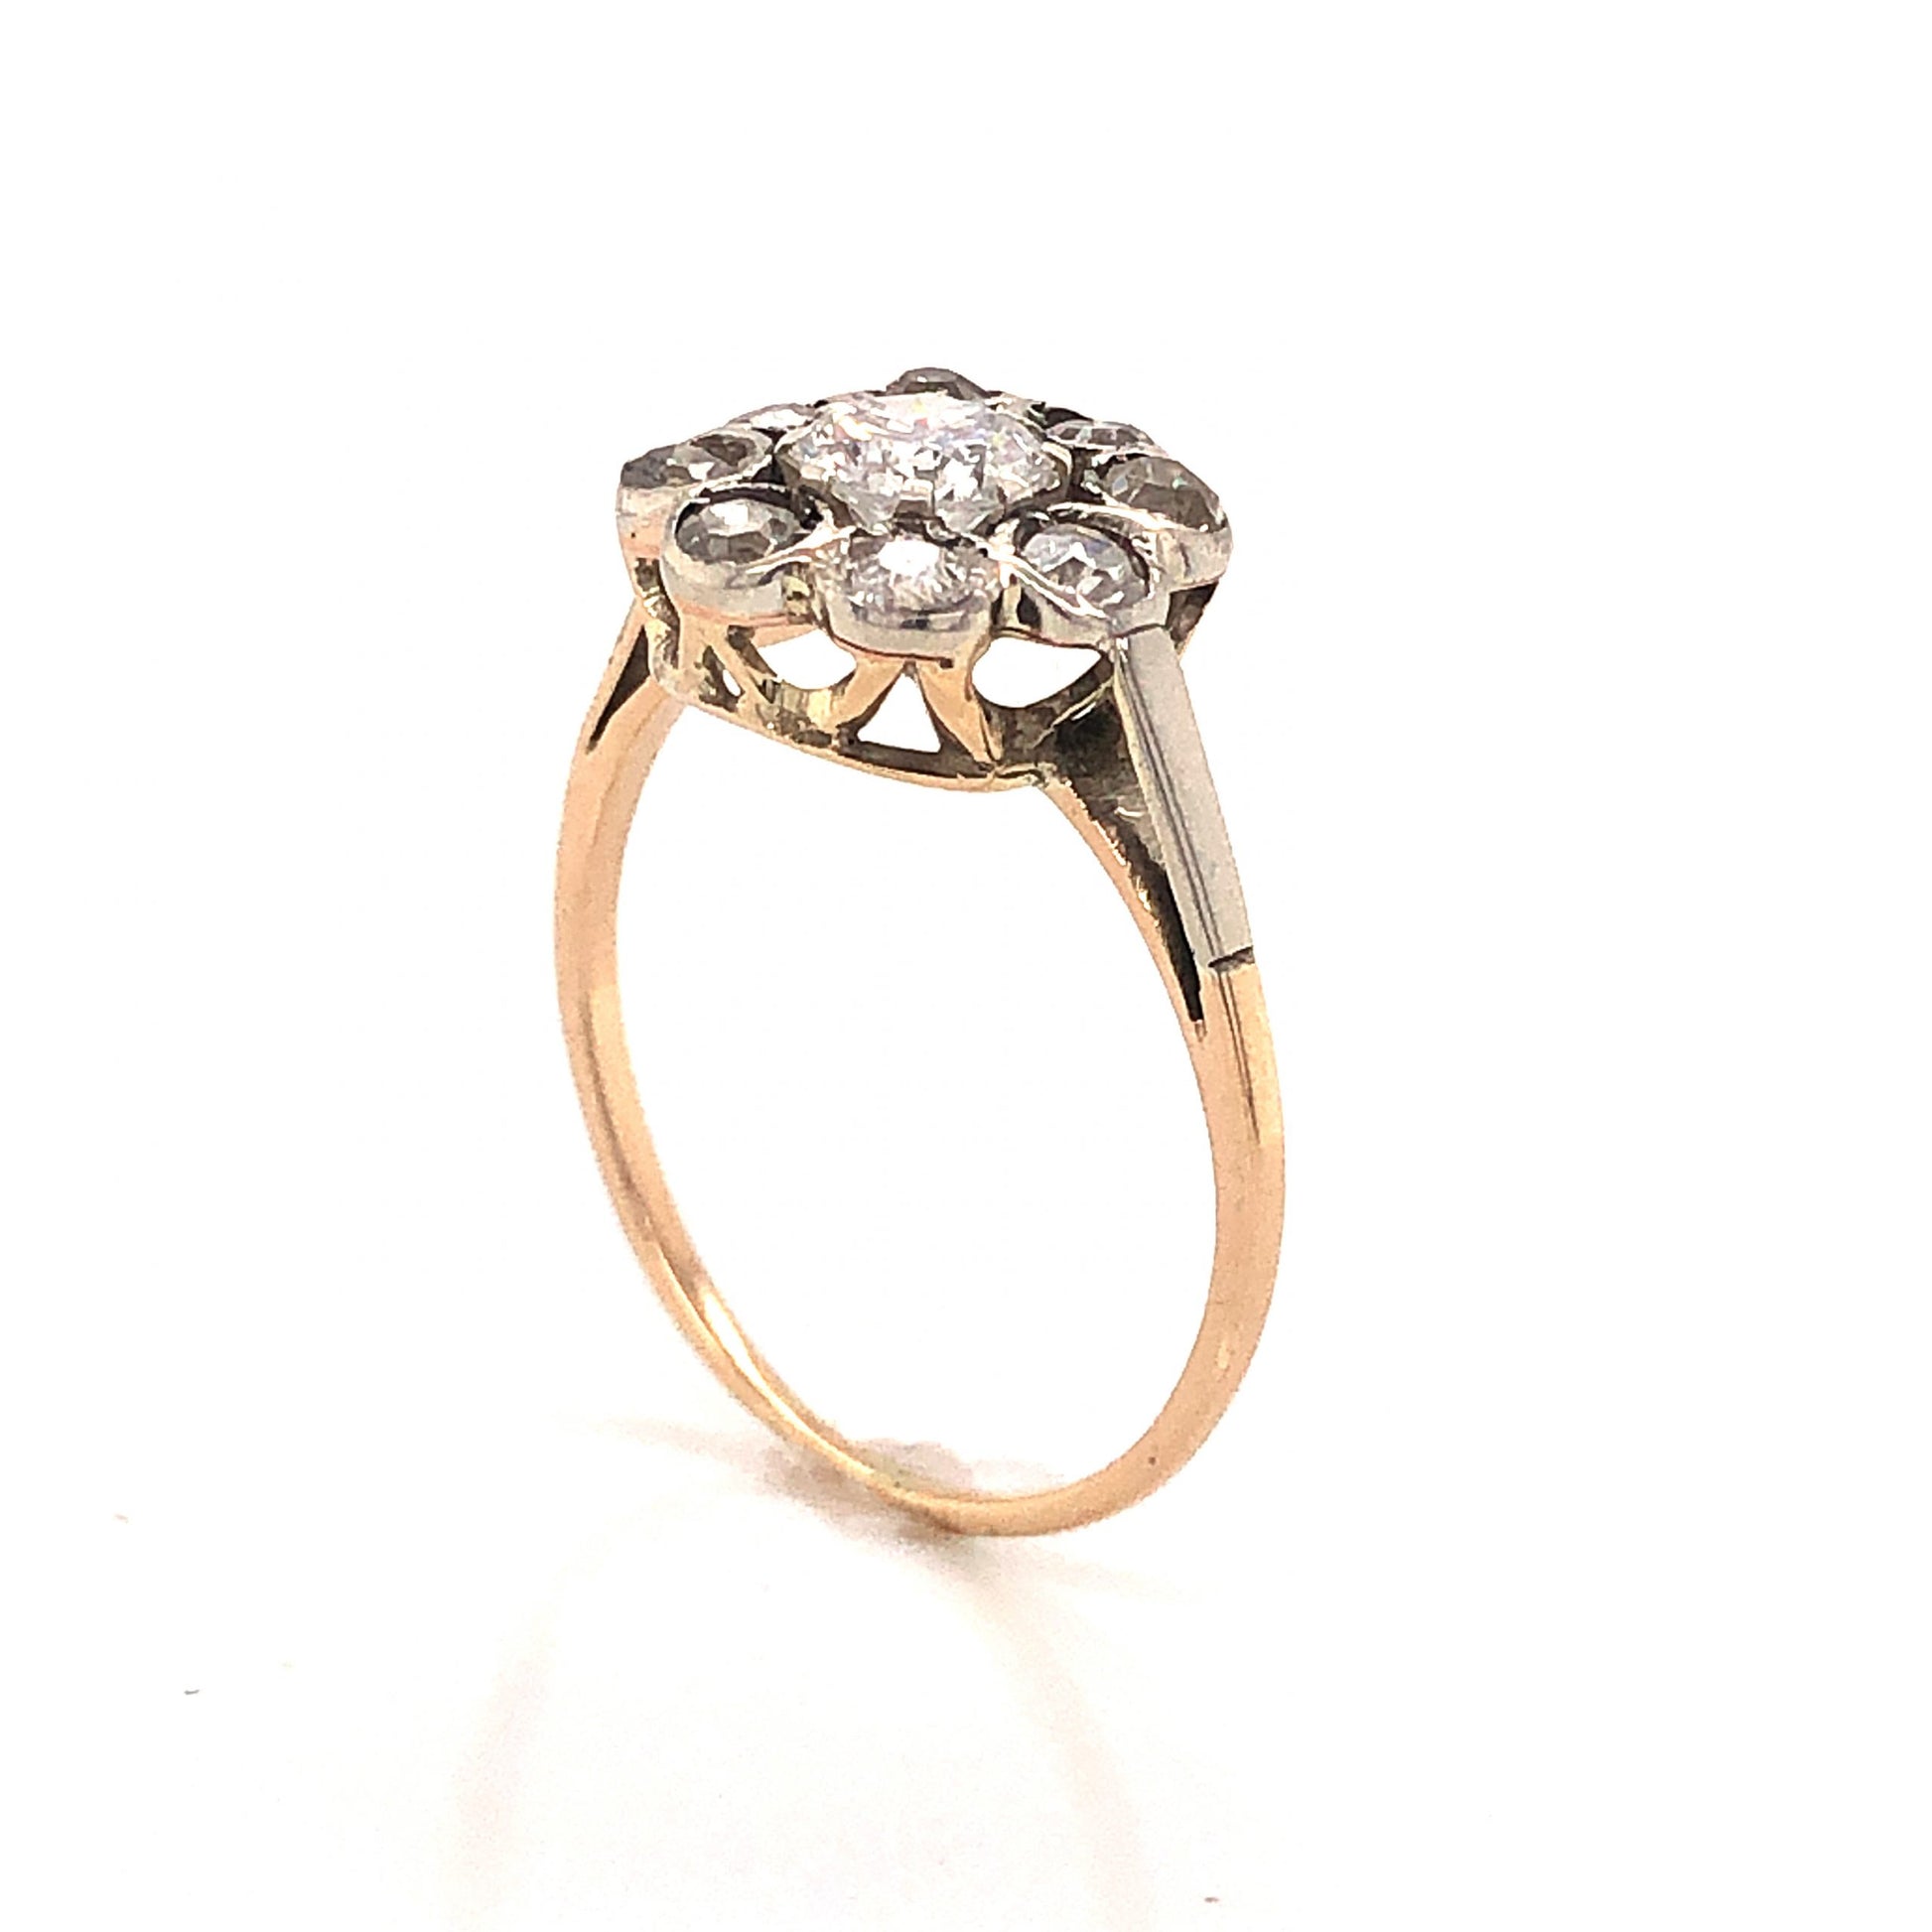 Victorian Bezel Set Diamond Cluster Engagement Ring in Silver & 14kComposition: Sterling Silver/14 Karat Yellow Gold Ring Size: 6 Total Diamond Weight: .78ct Total Gram Weight: 1.8 g